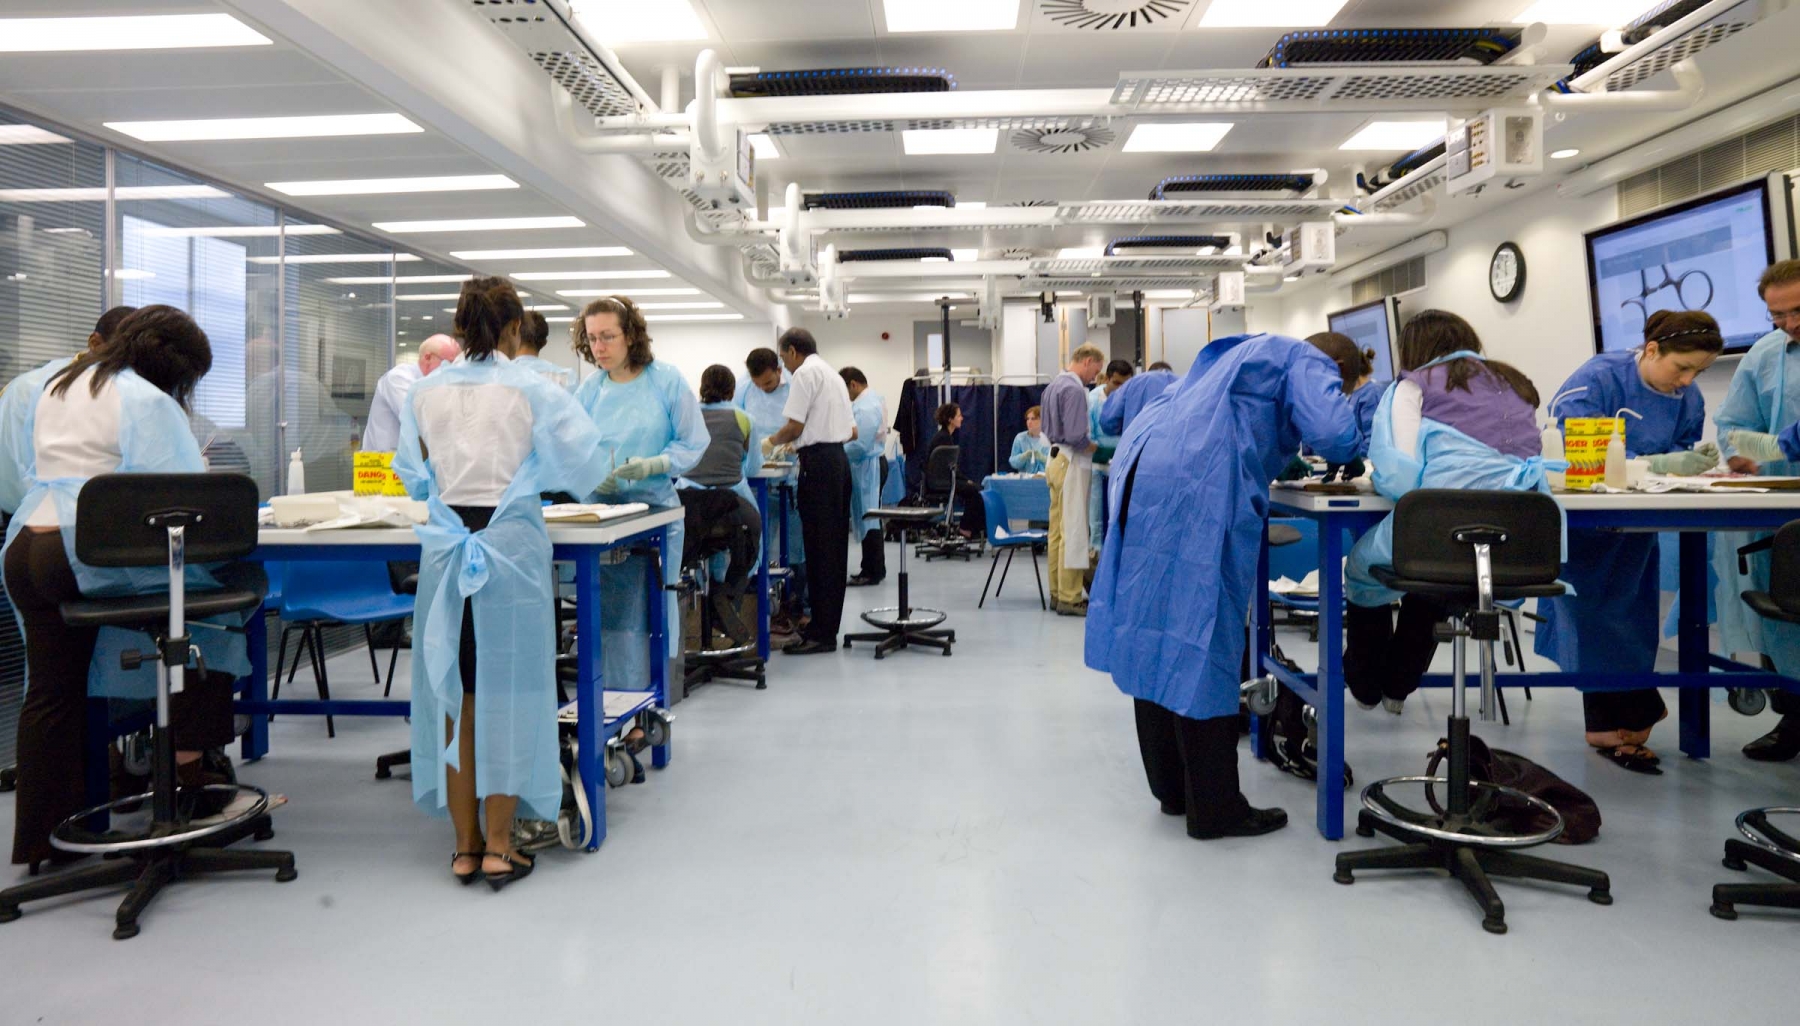 Behind the scenes at the Royal College of Surgeons